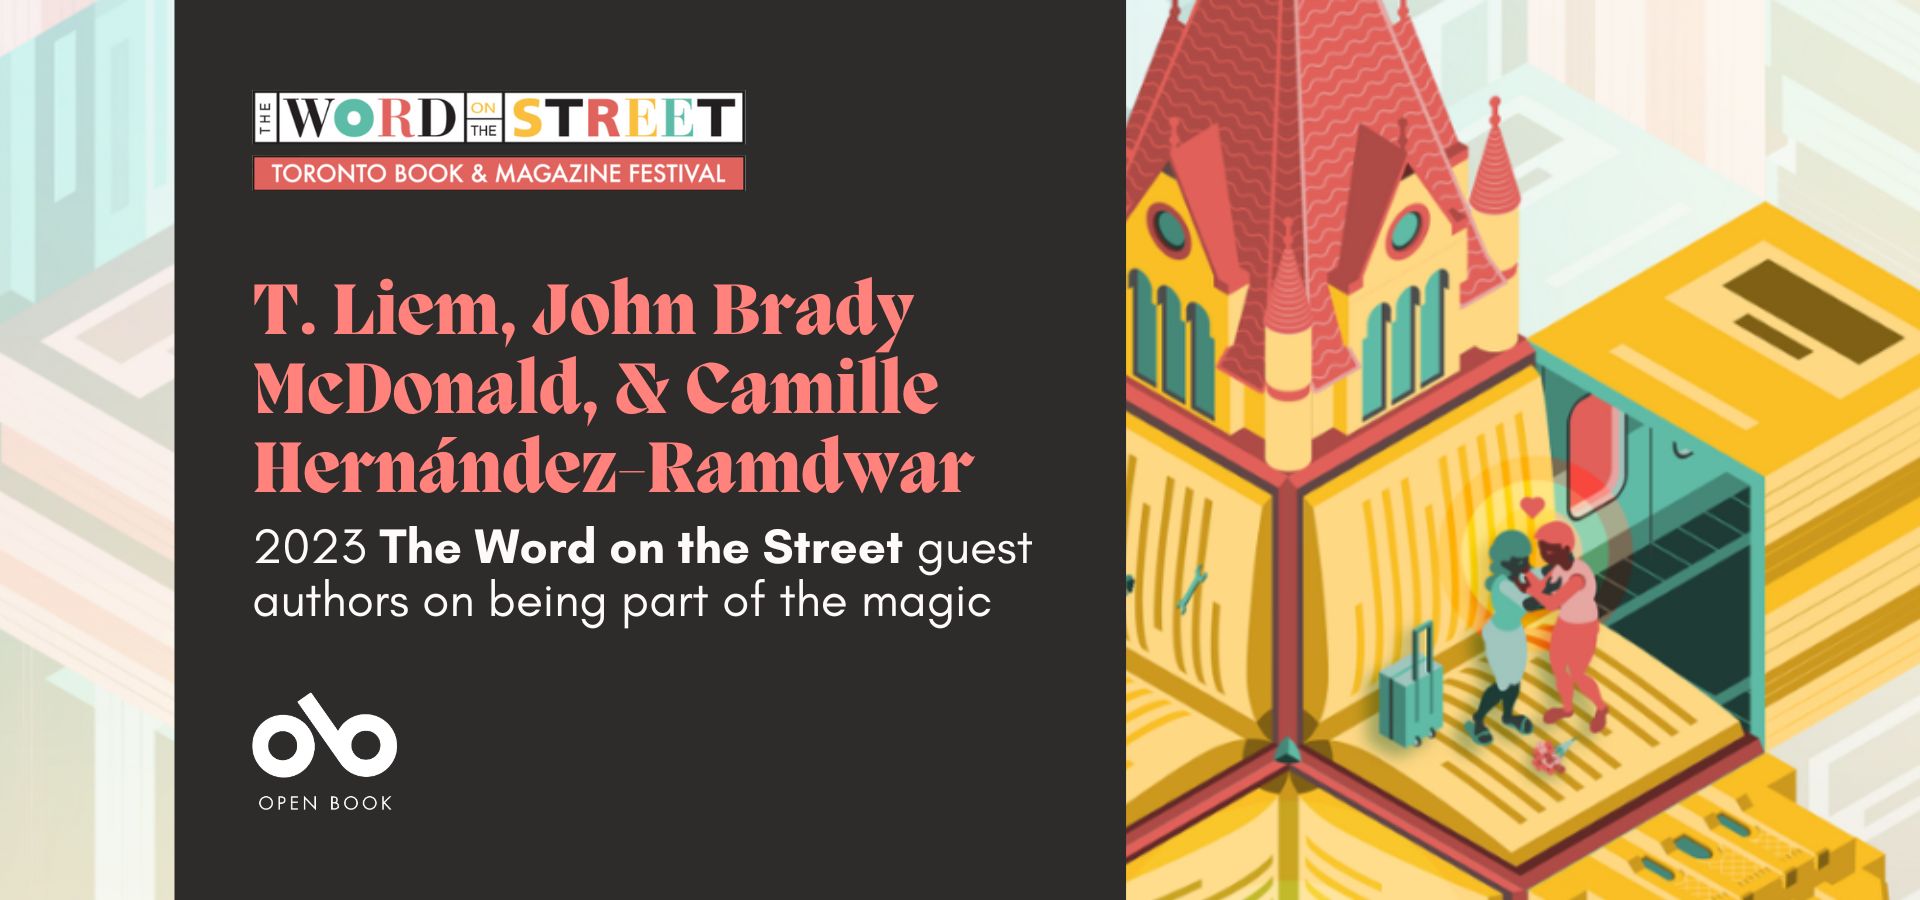 banner image with poster art from the 2023 edition of The Word on the Street Toronto featuring geometric buildings that look like books. Text on a dark background reads: T. Liem, John Brady McDonald, & Camille Hernández-Ramdwar. 2023 Guest authors on being part of the magic"